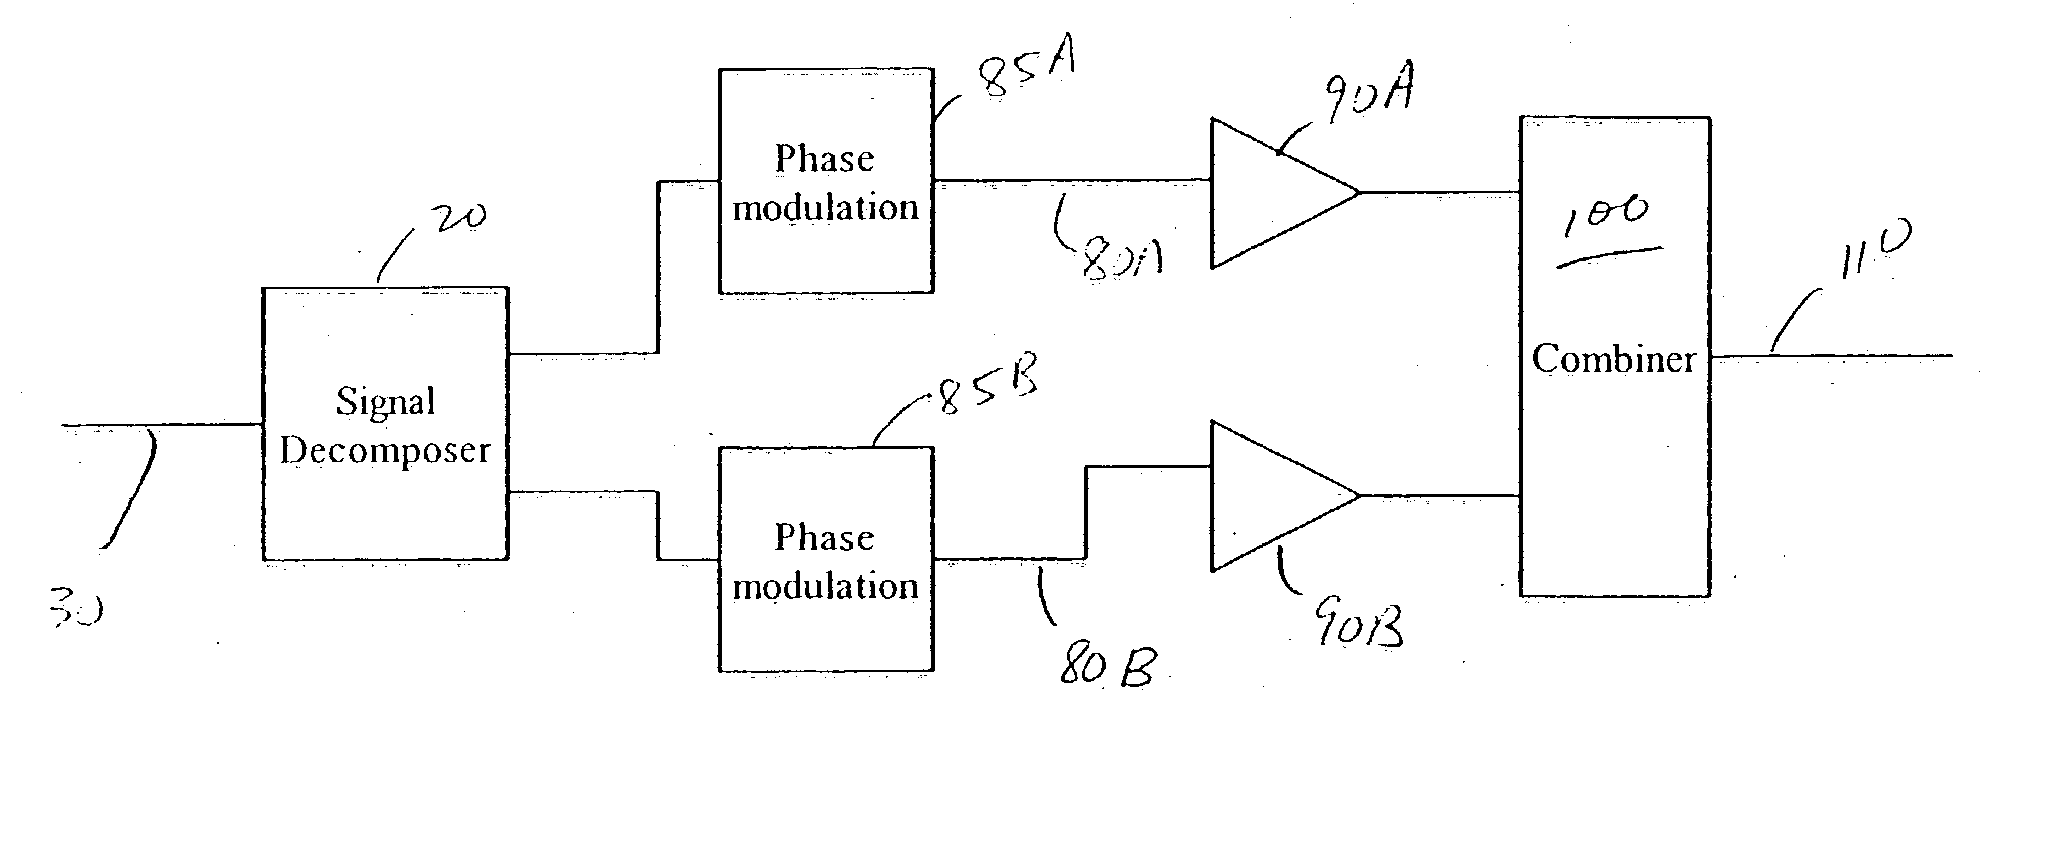 Adaptive predistortion for a transmit system with gain, phase and delay adjustments